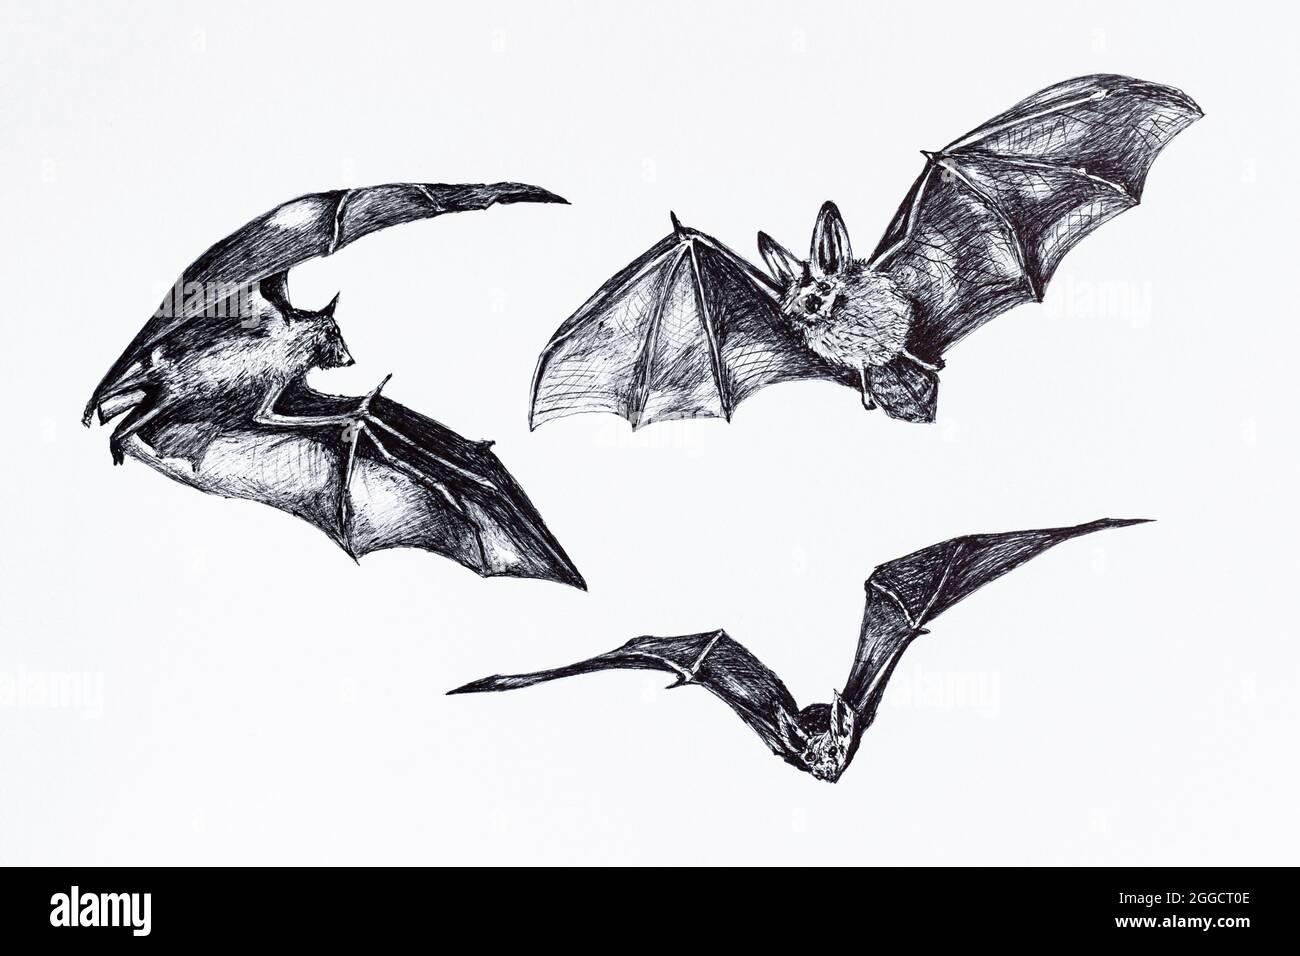 Collection sketch of bats. Hand drawing of flying bat, bat hanging upside down on white background. Stock Photo